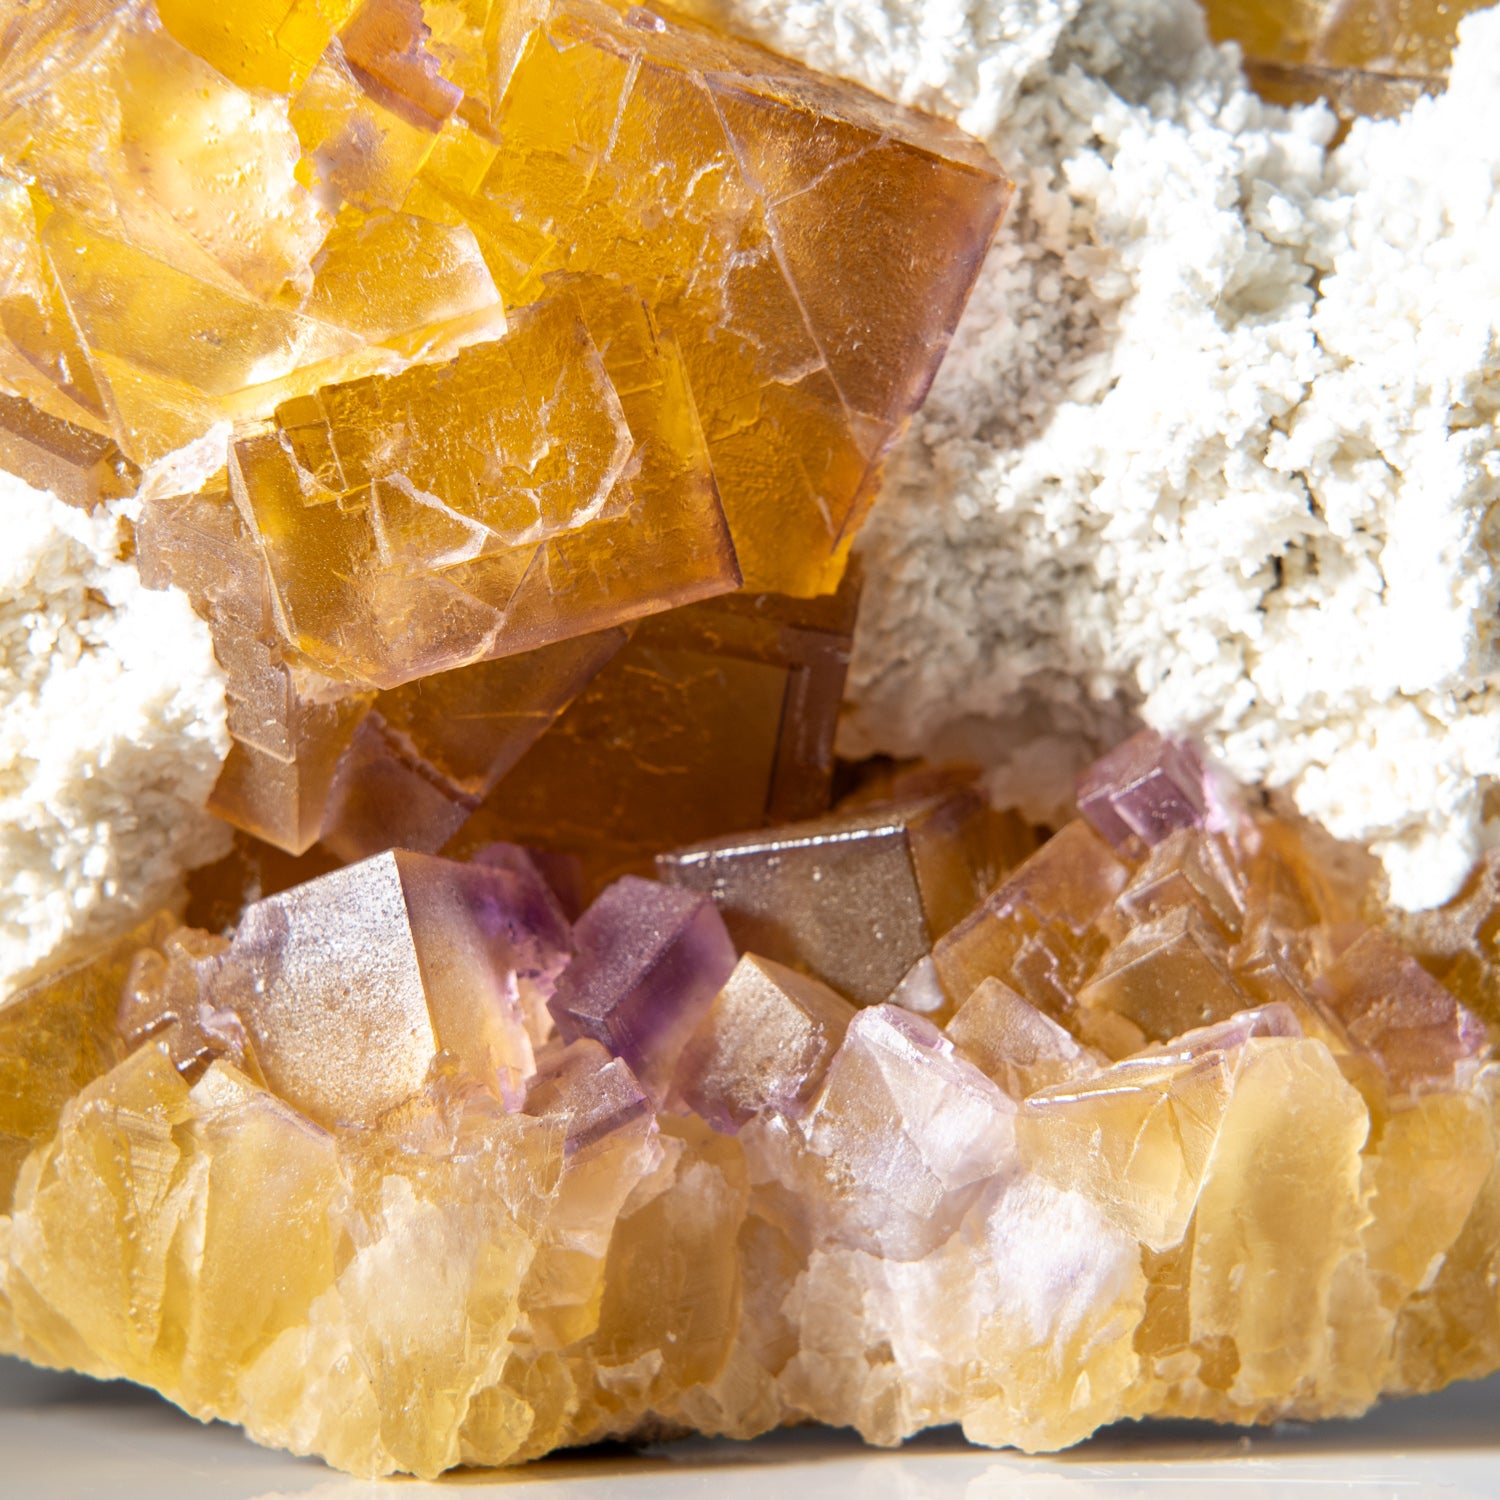 Yellow Fluorite with Barite from Elmwood Mine, Carthage, Smith County, Tennessee